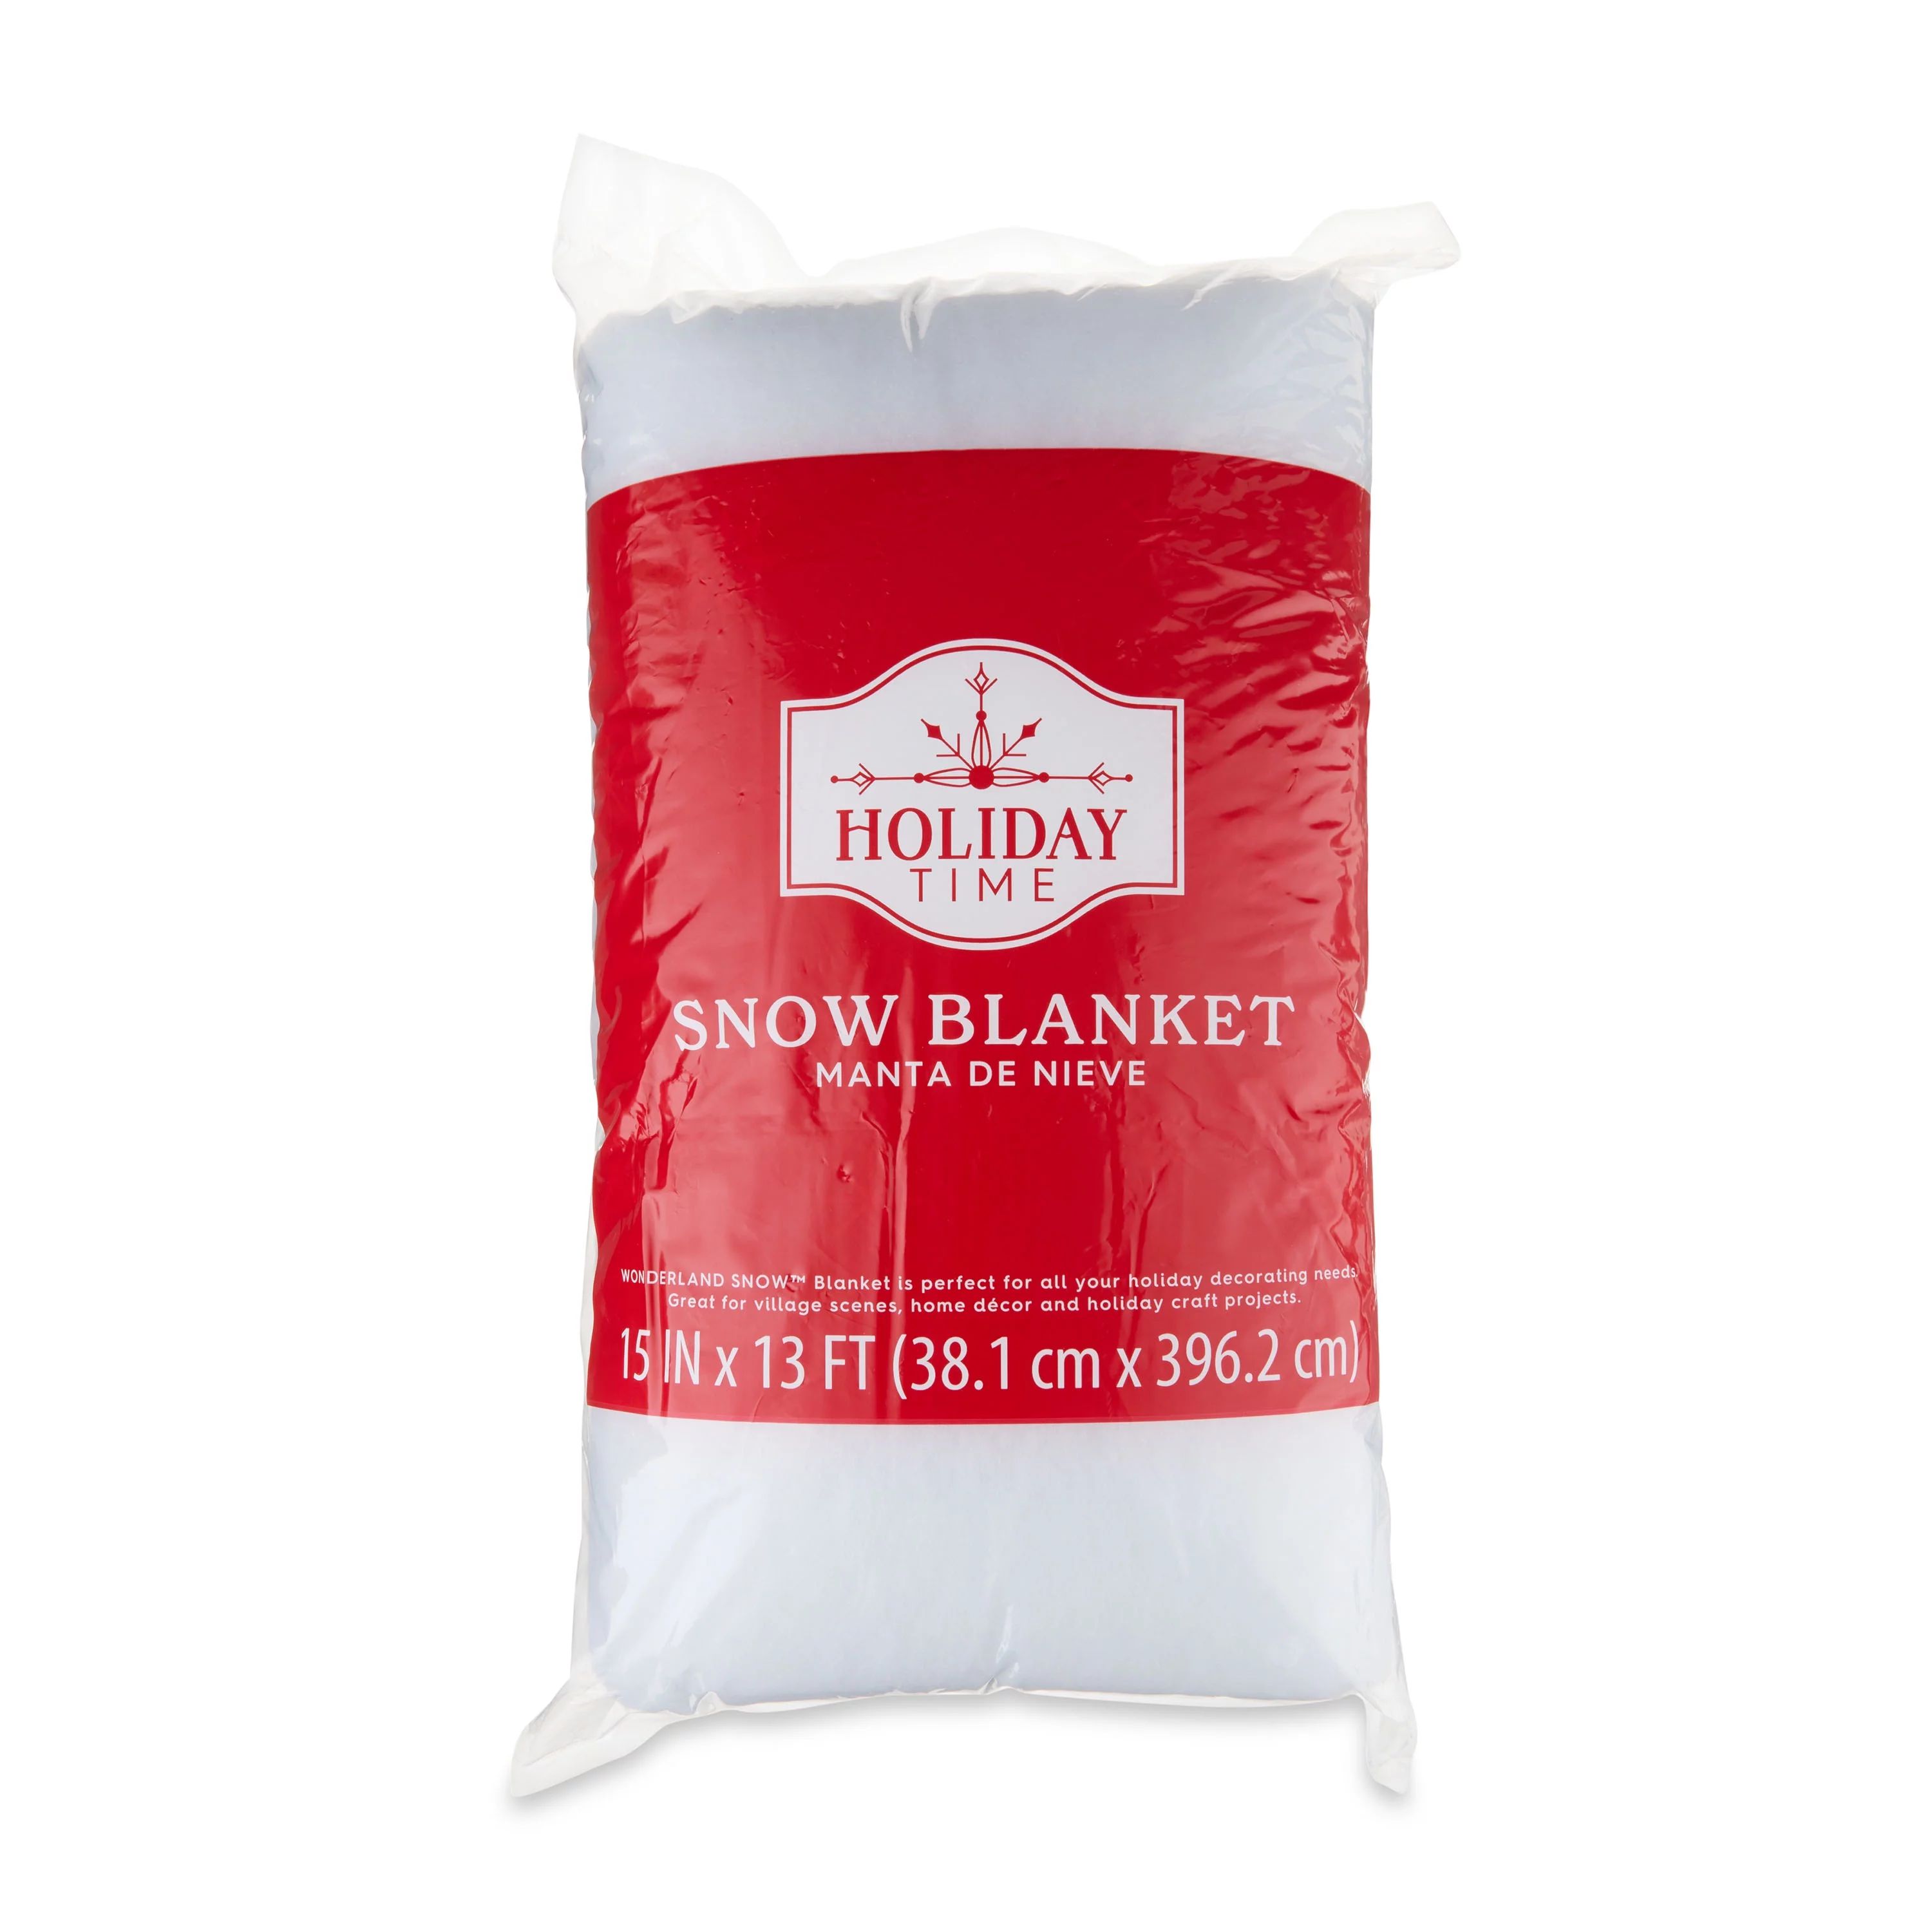 Christmas White Color Artificial Snow Cover Blanket, 0.36lbs, 15 in x 13 ft, by Holiday Time | Walmart (US)